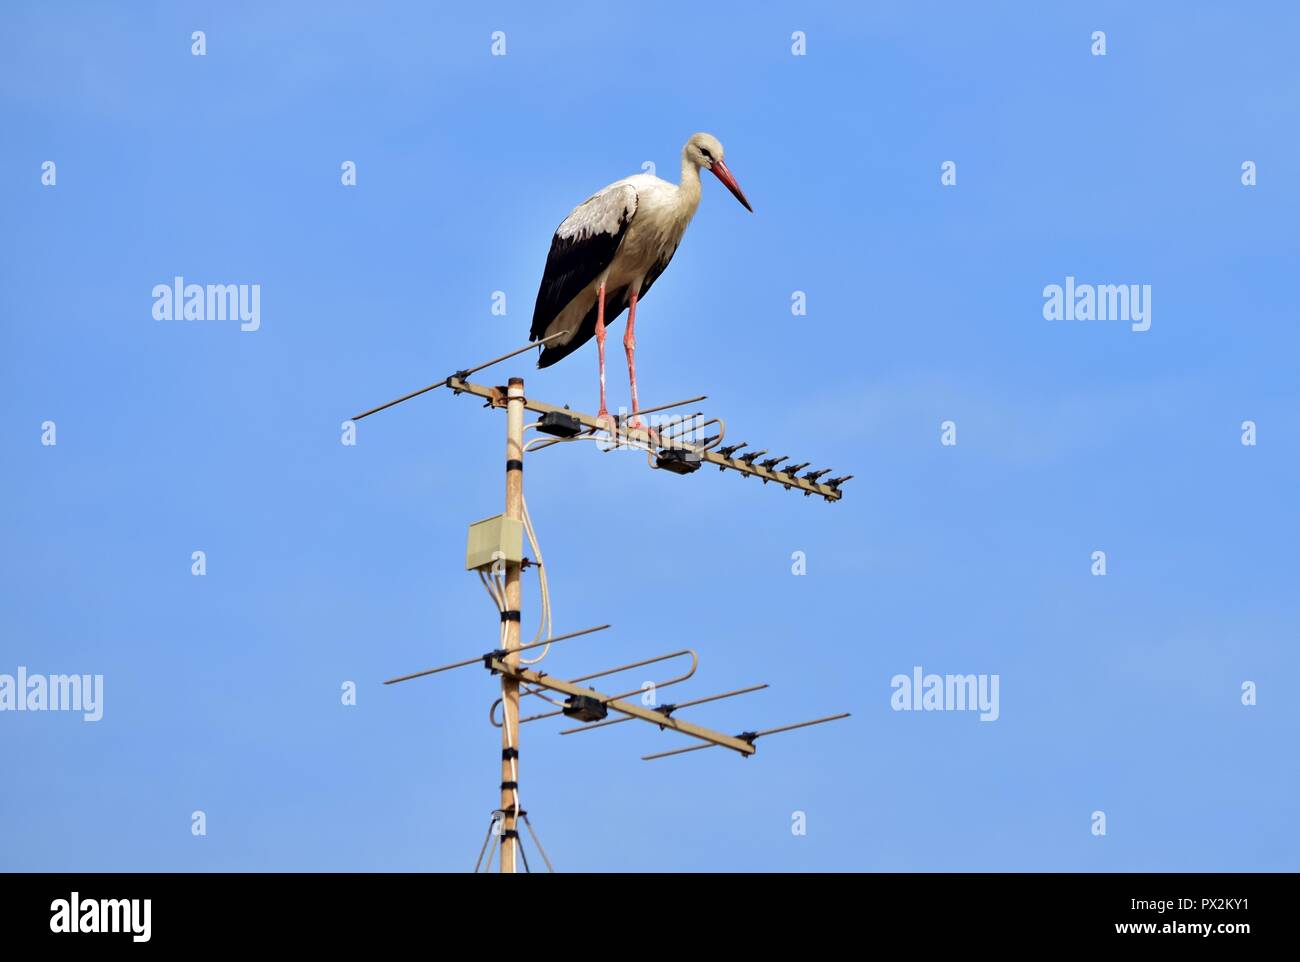 White Stork, Ciconia ciconia, migrating over the Maltese Islands, resting and balancing on television antenna, aerial, transmitter, urban bird nature Stock Photo